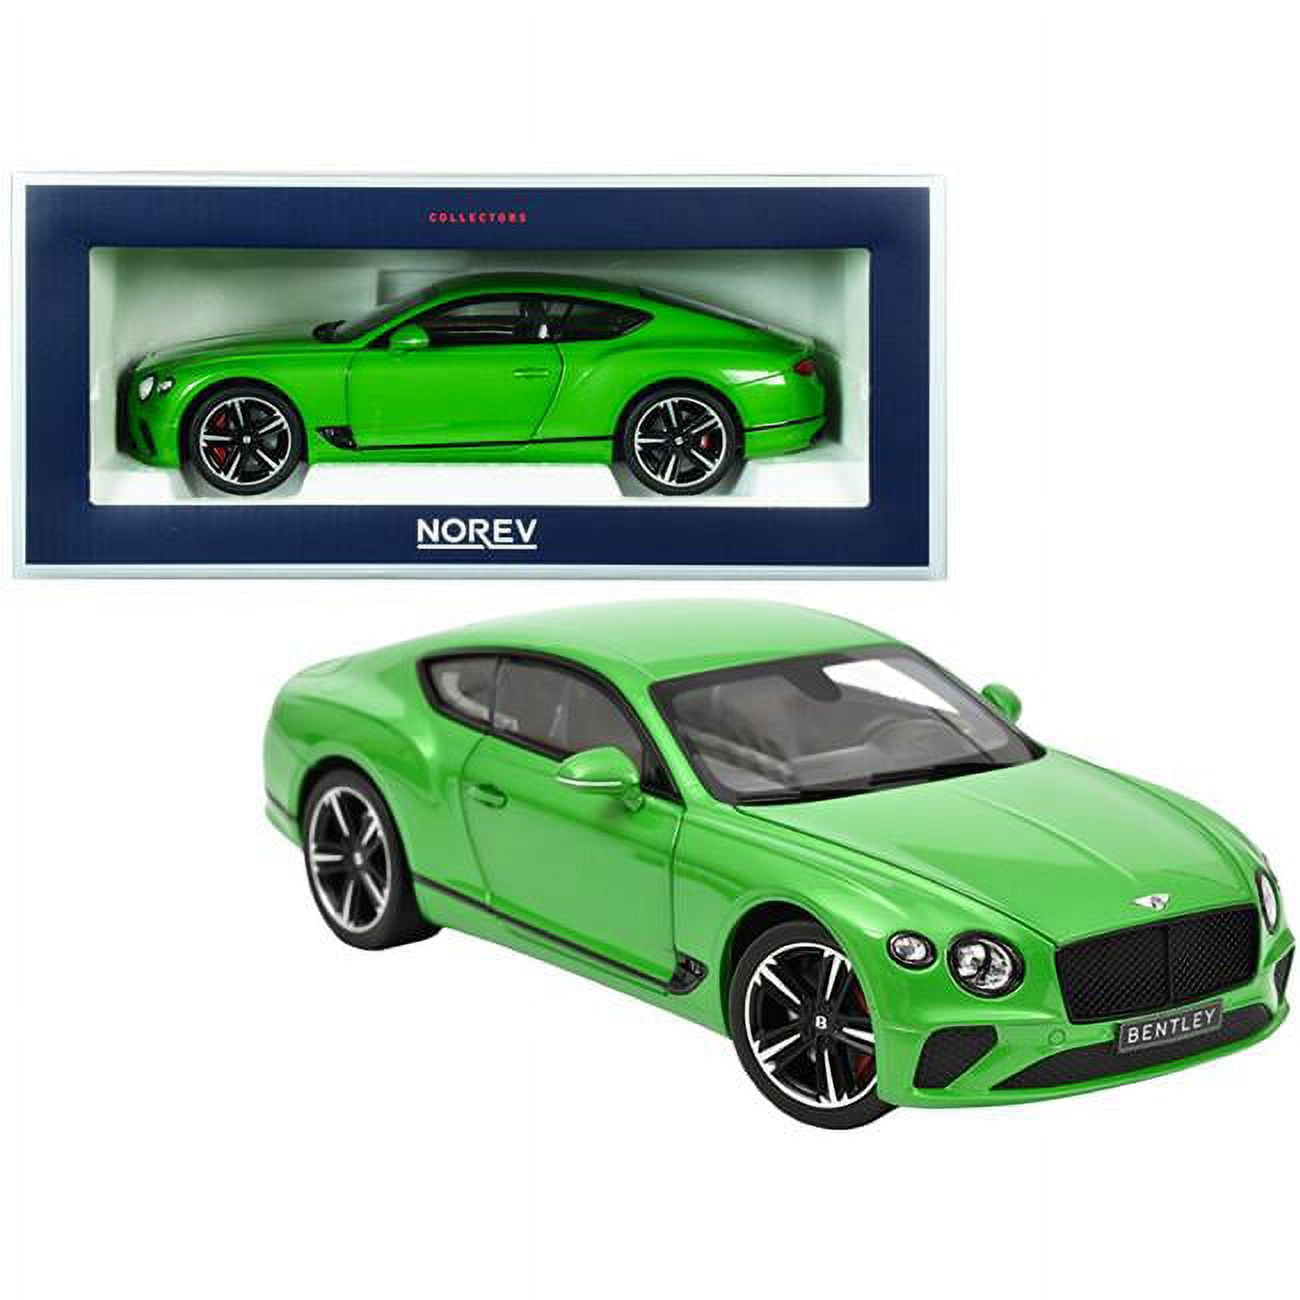 Picture of Norev 182784 Apple Green Metallic 1 by 18 Diecast Model Car for 2018 Bentley Continental GT